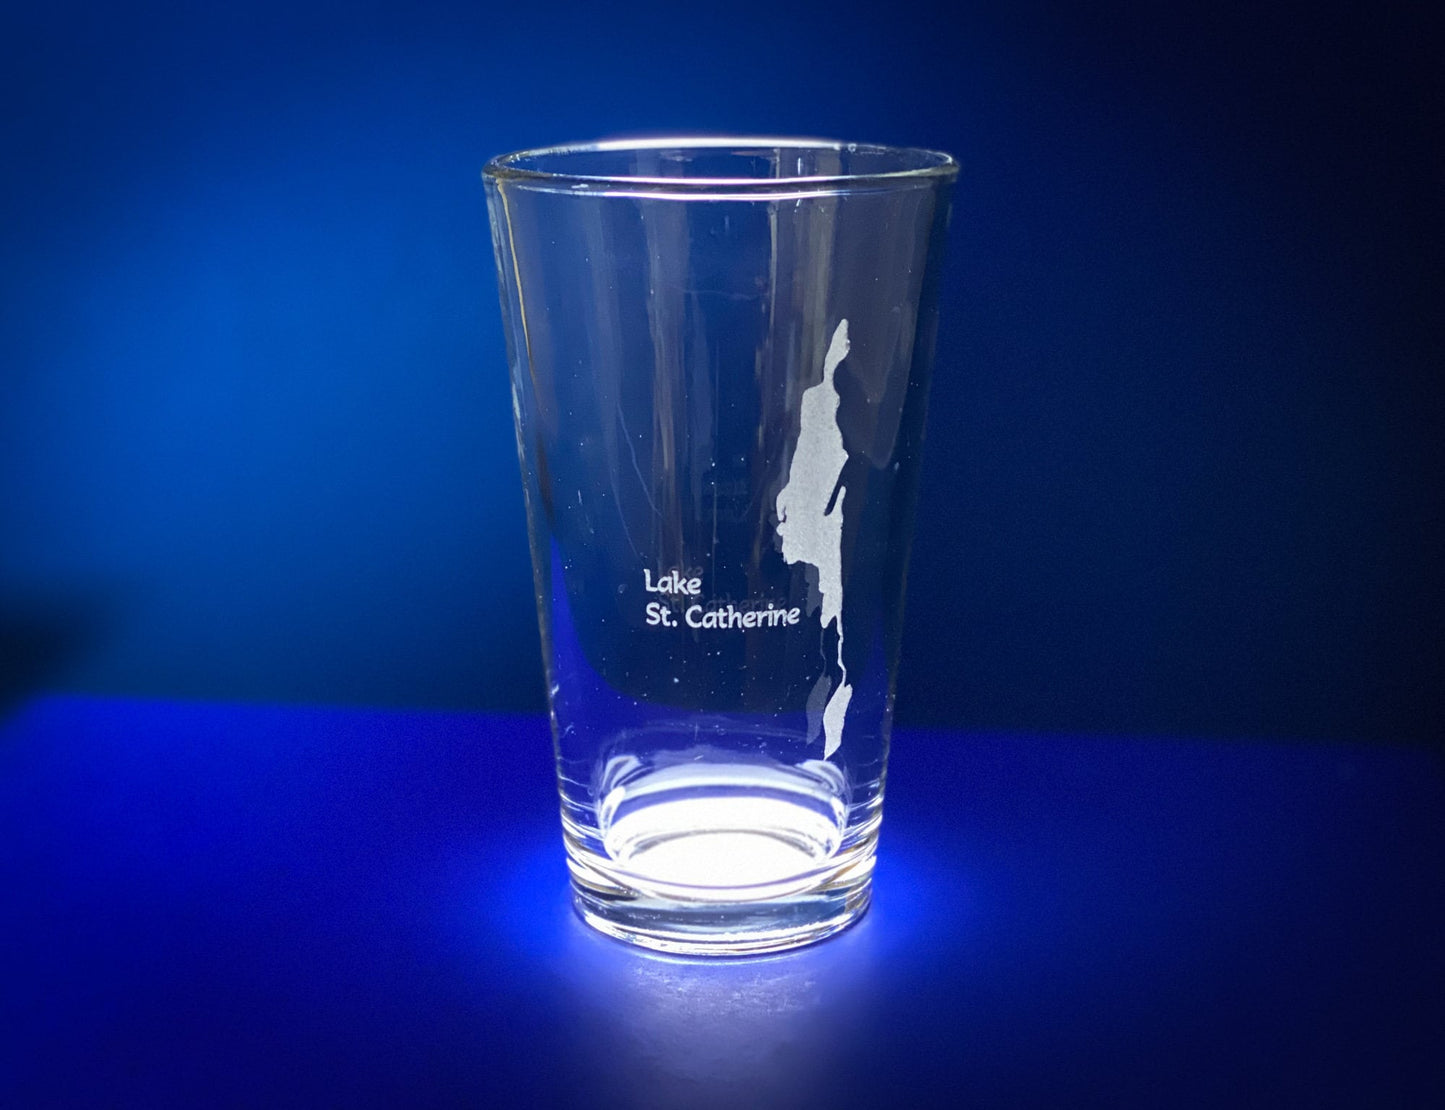 Lake St. Catherine Vermont Pint Glass - Laser engraved pint glass